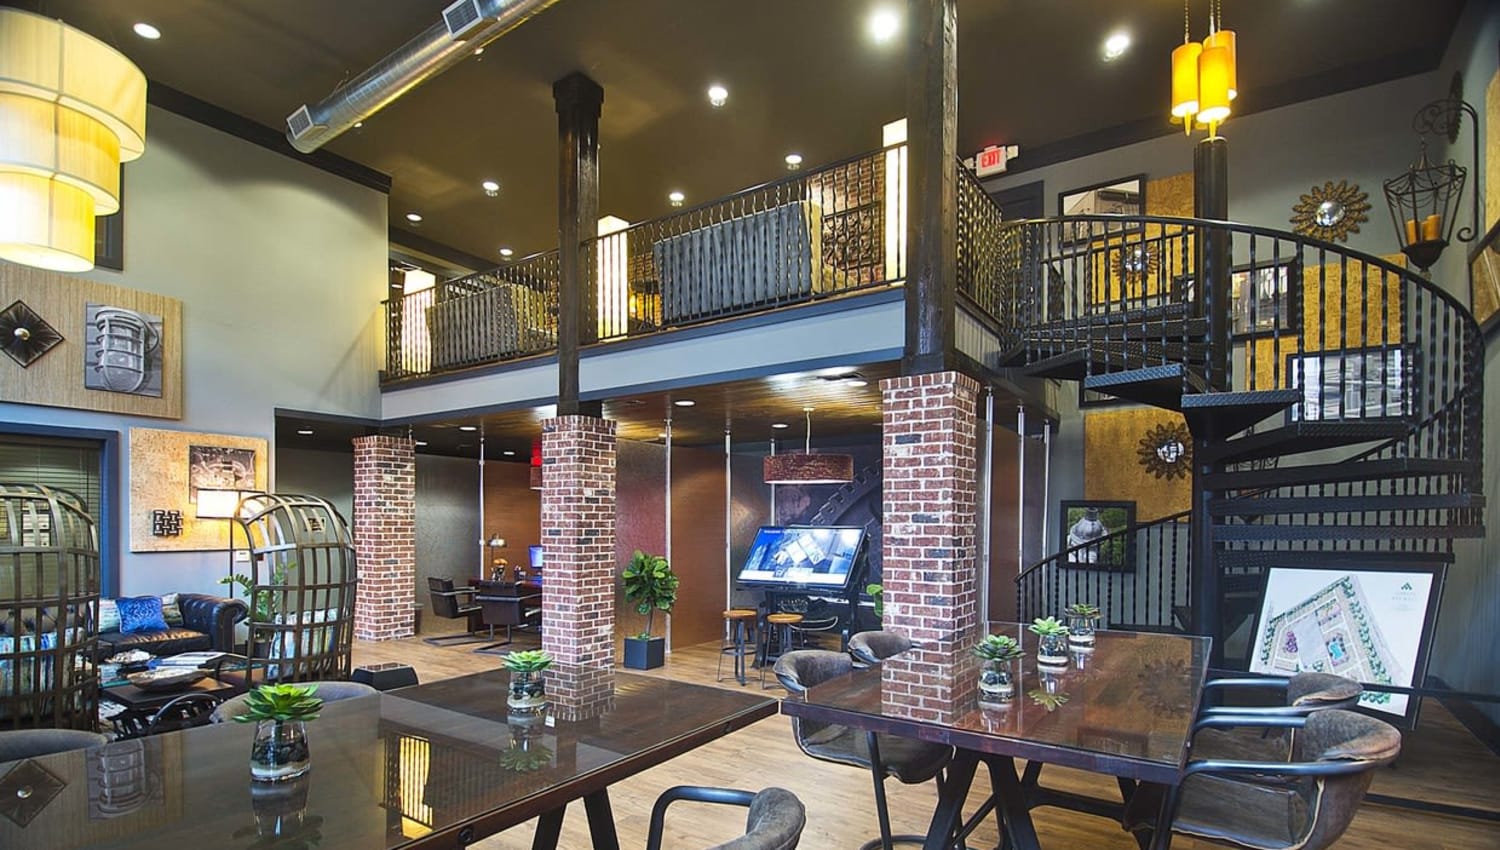 Inside the clubhouse at Porter Westside in Atlanta, Georgia